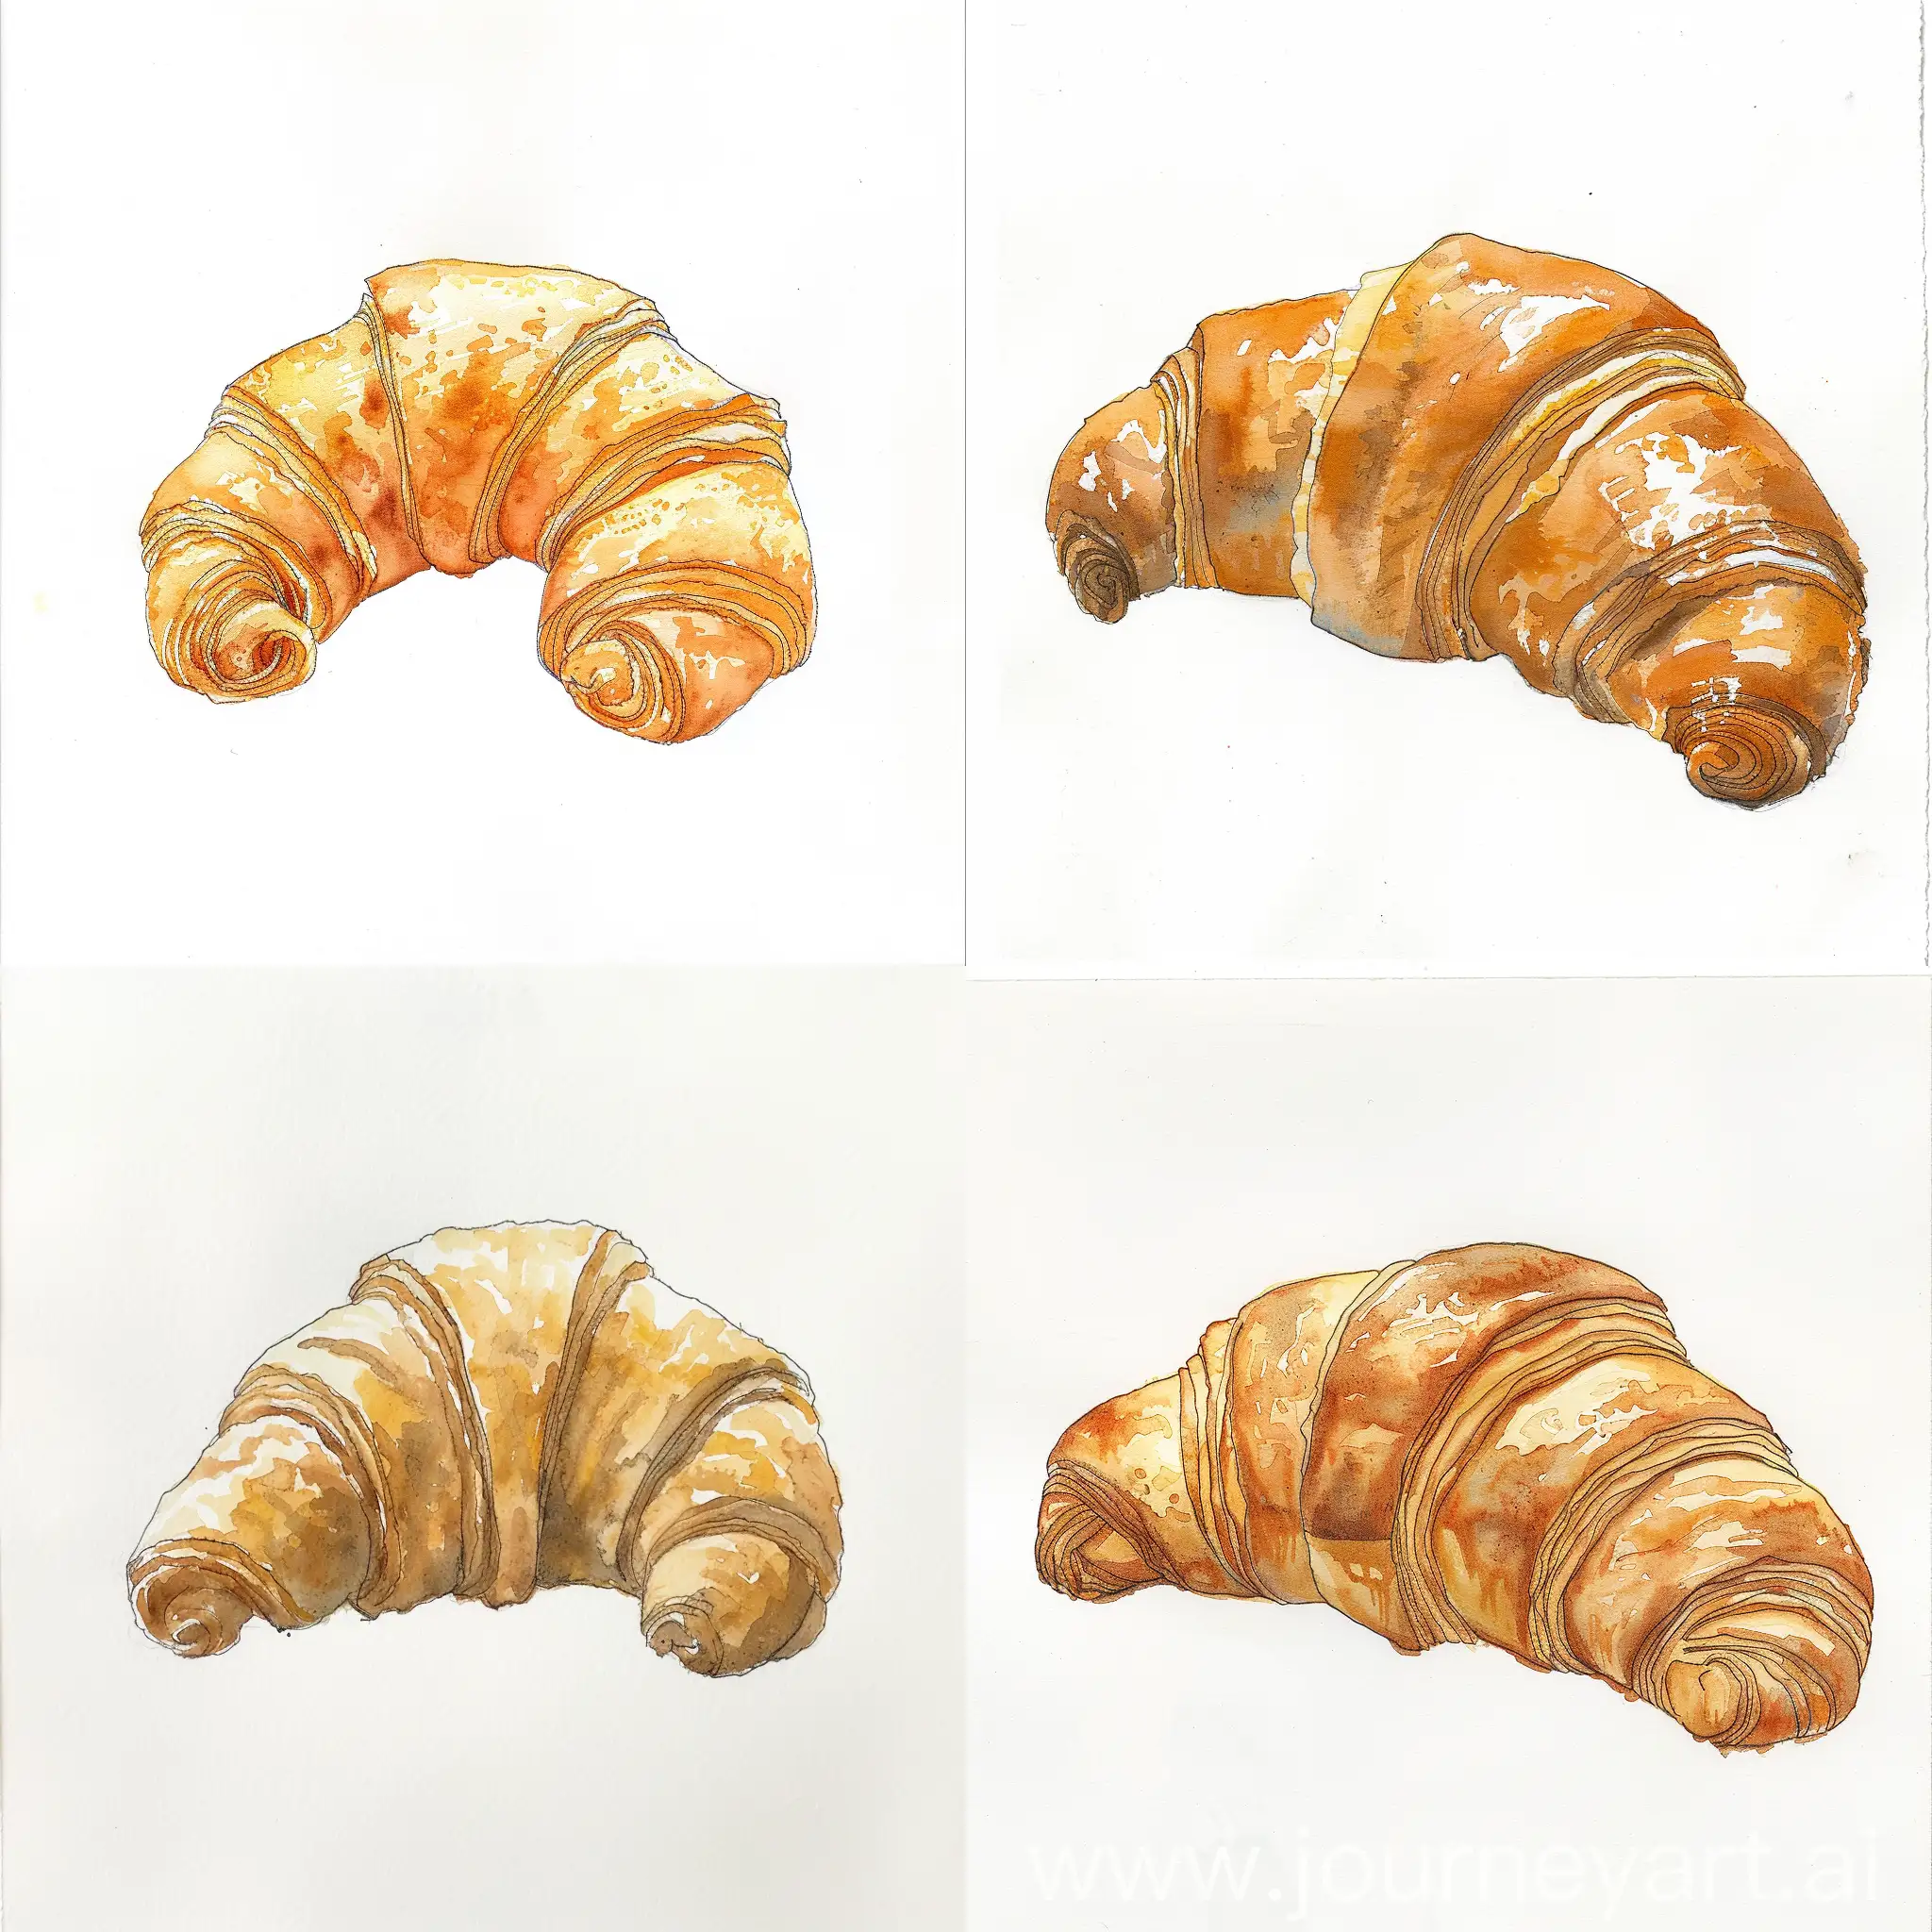 Minimalist-Line-Drawing-of-a-Croissant-in-Watercolor-Style